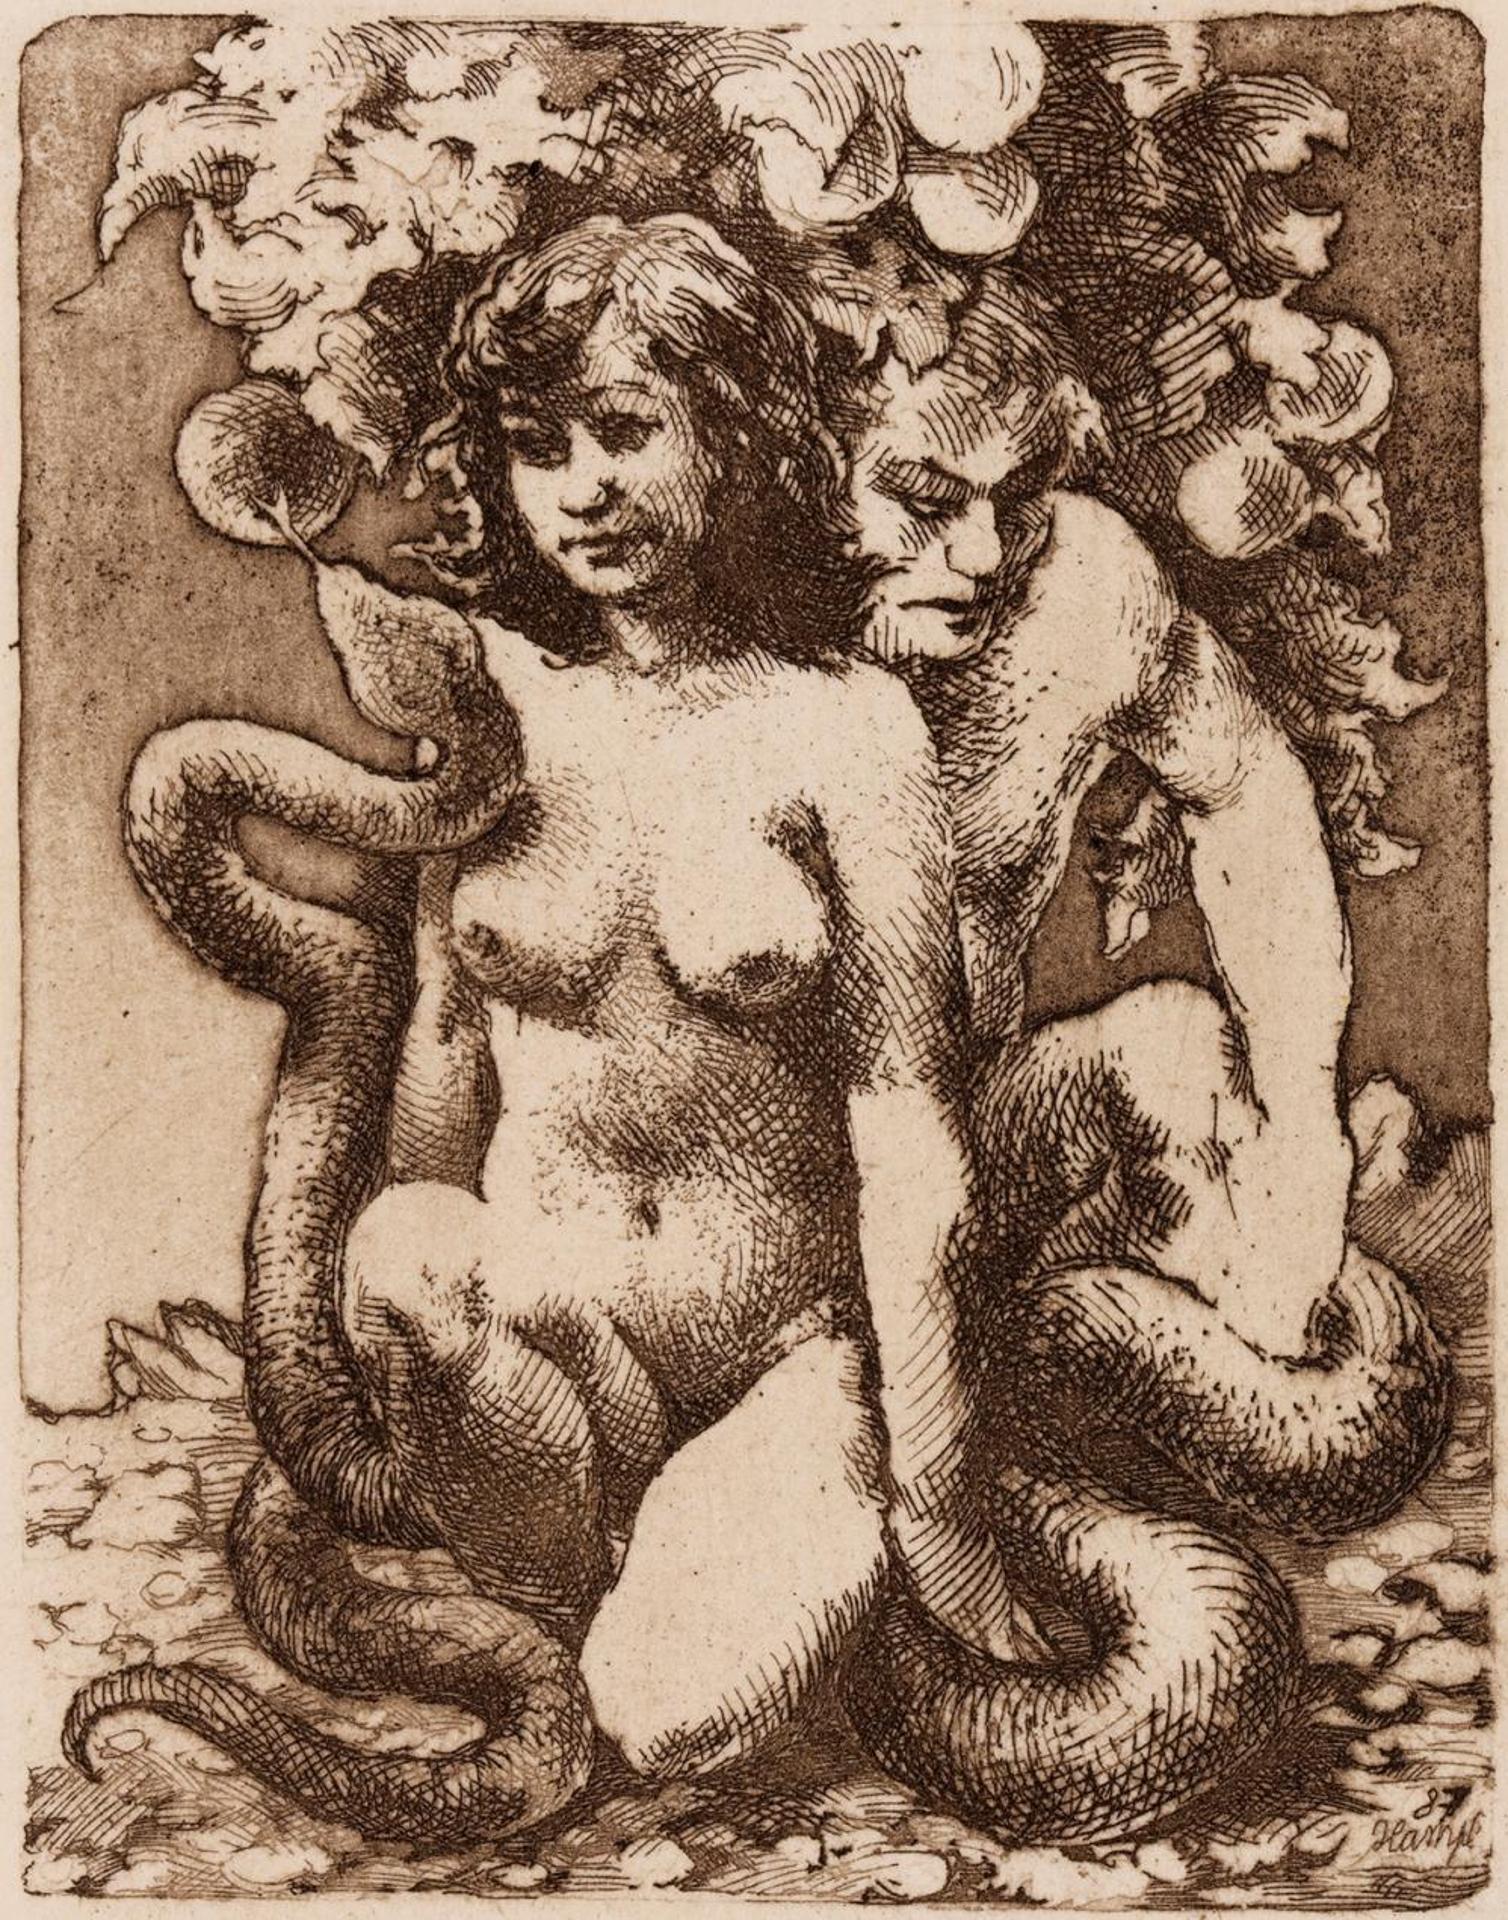 Petr Hampl (1969) - Untitled - Eve and Adam and Snake